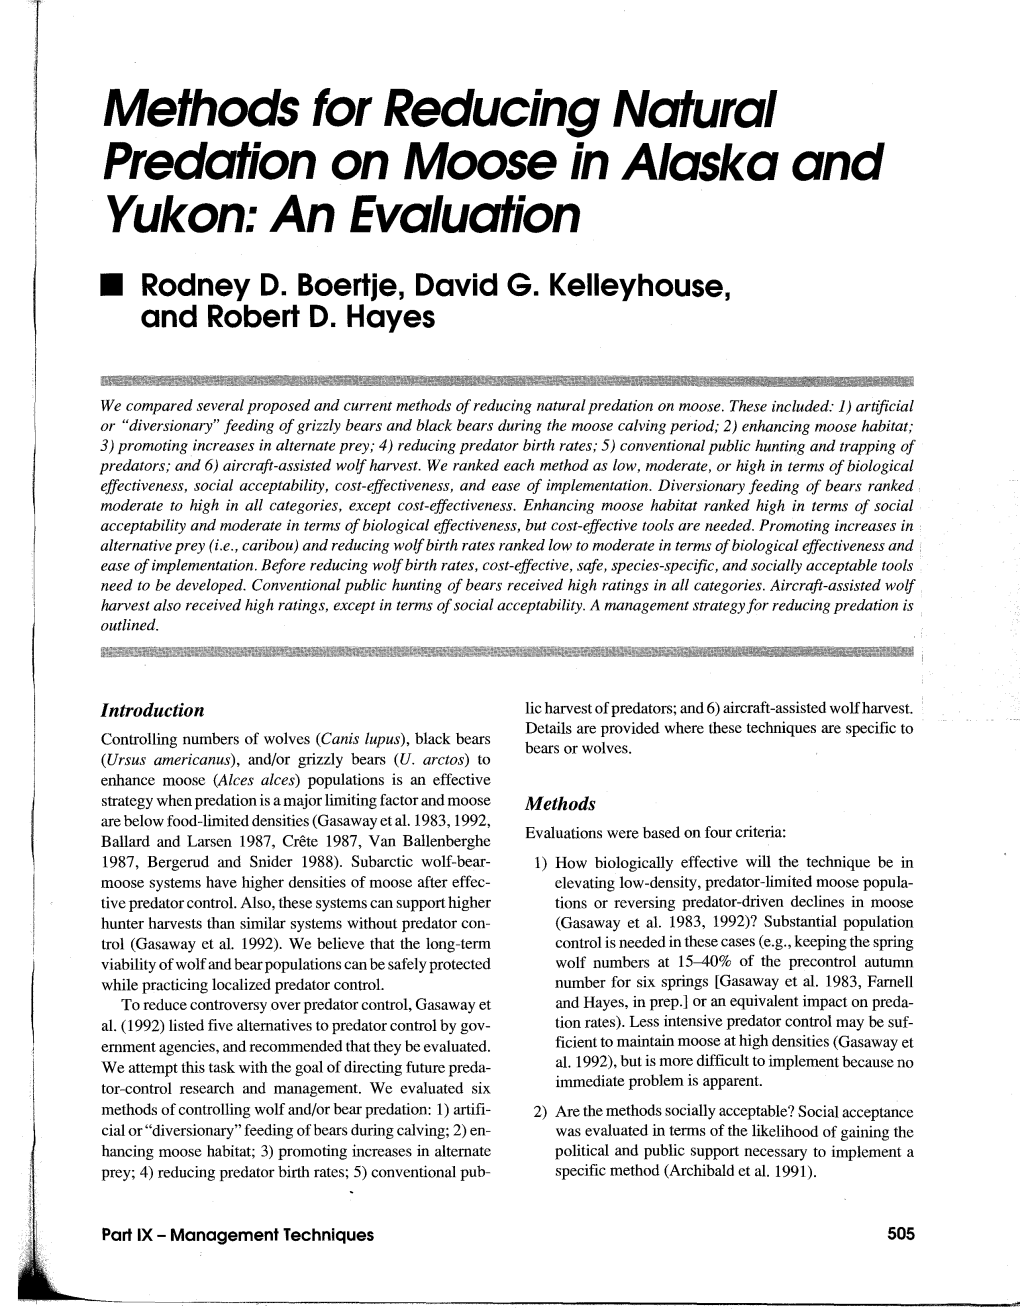 Methods for Reducing Natural Predation on Moose in Alaska and Yukon: an Evaluation